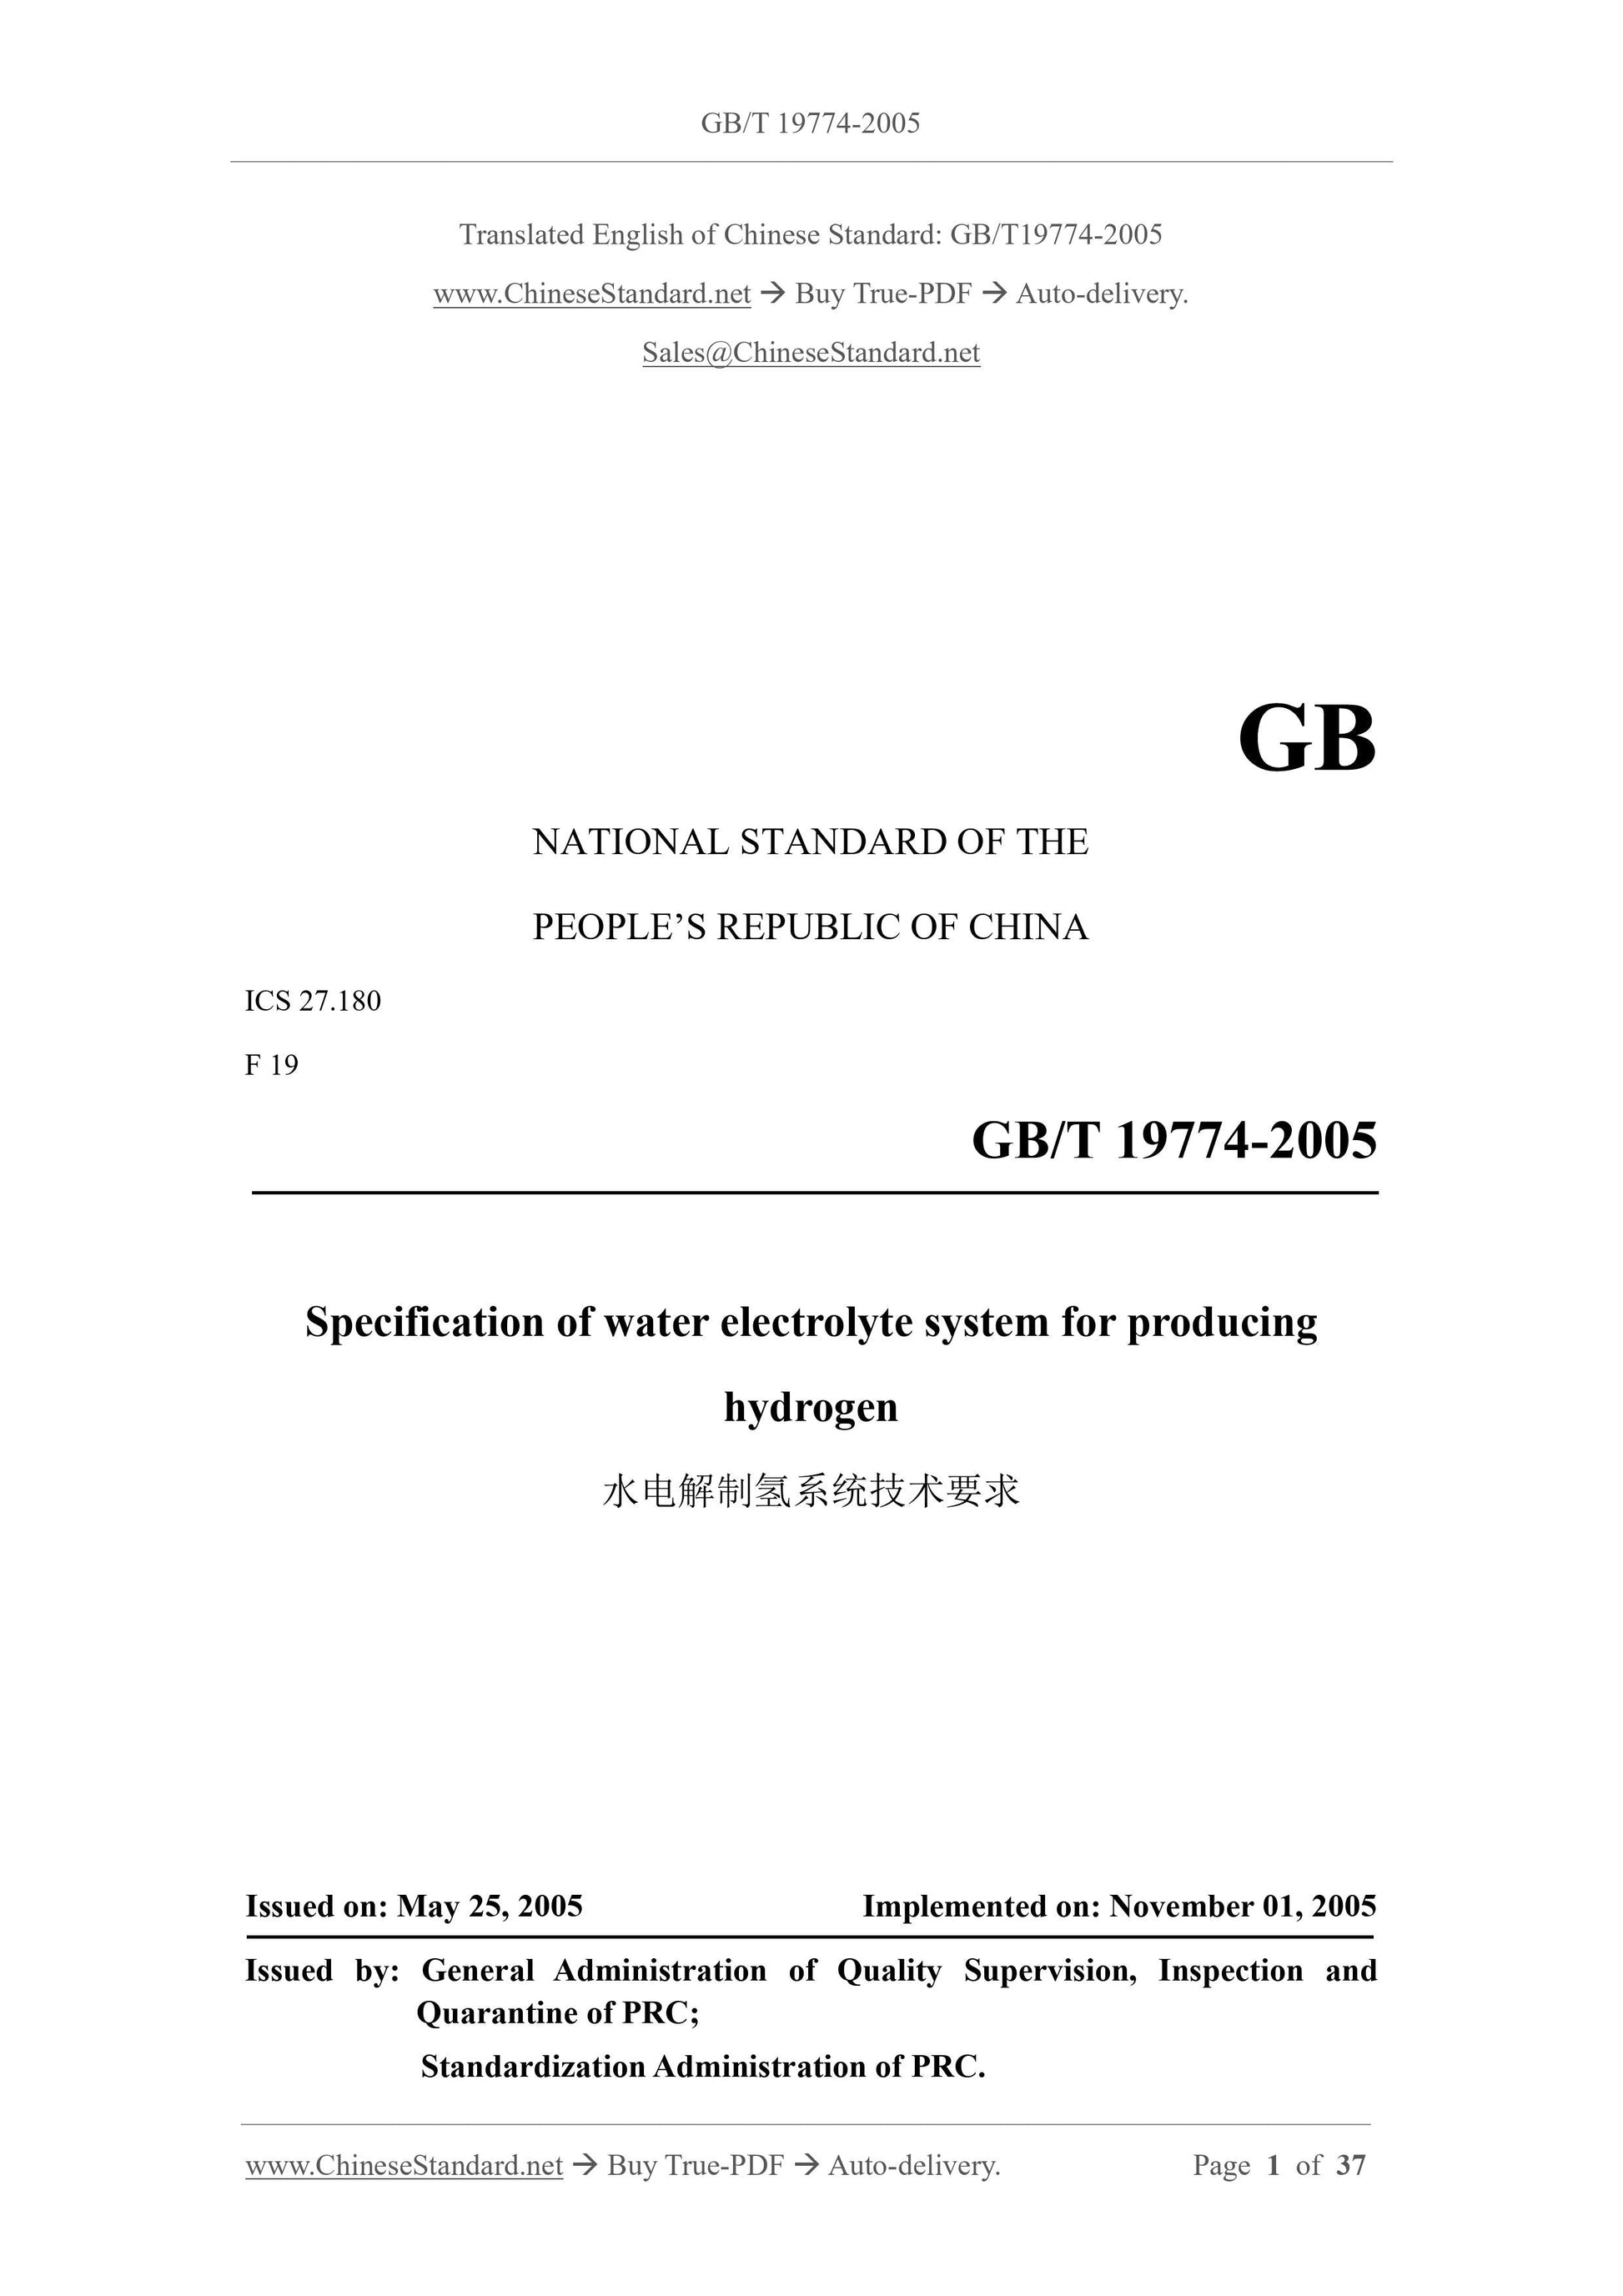 GB/T 19774-2005 Page 1